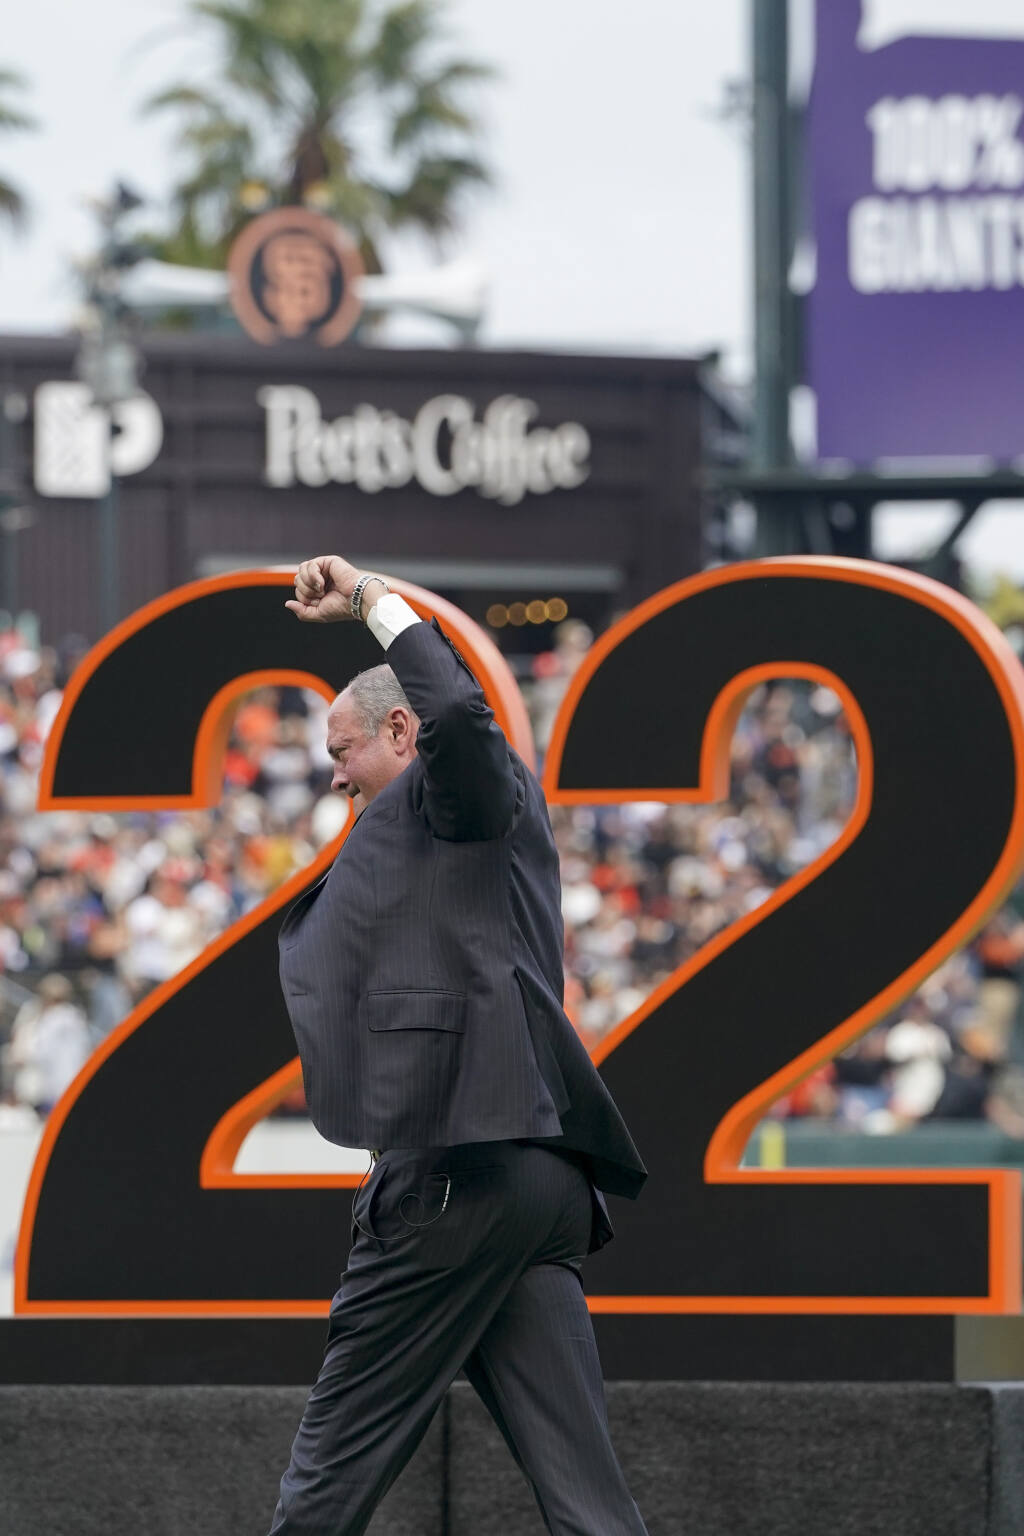 SF Giants News: Will Clark's jersey number retirement is here